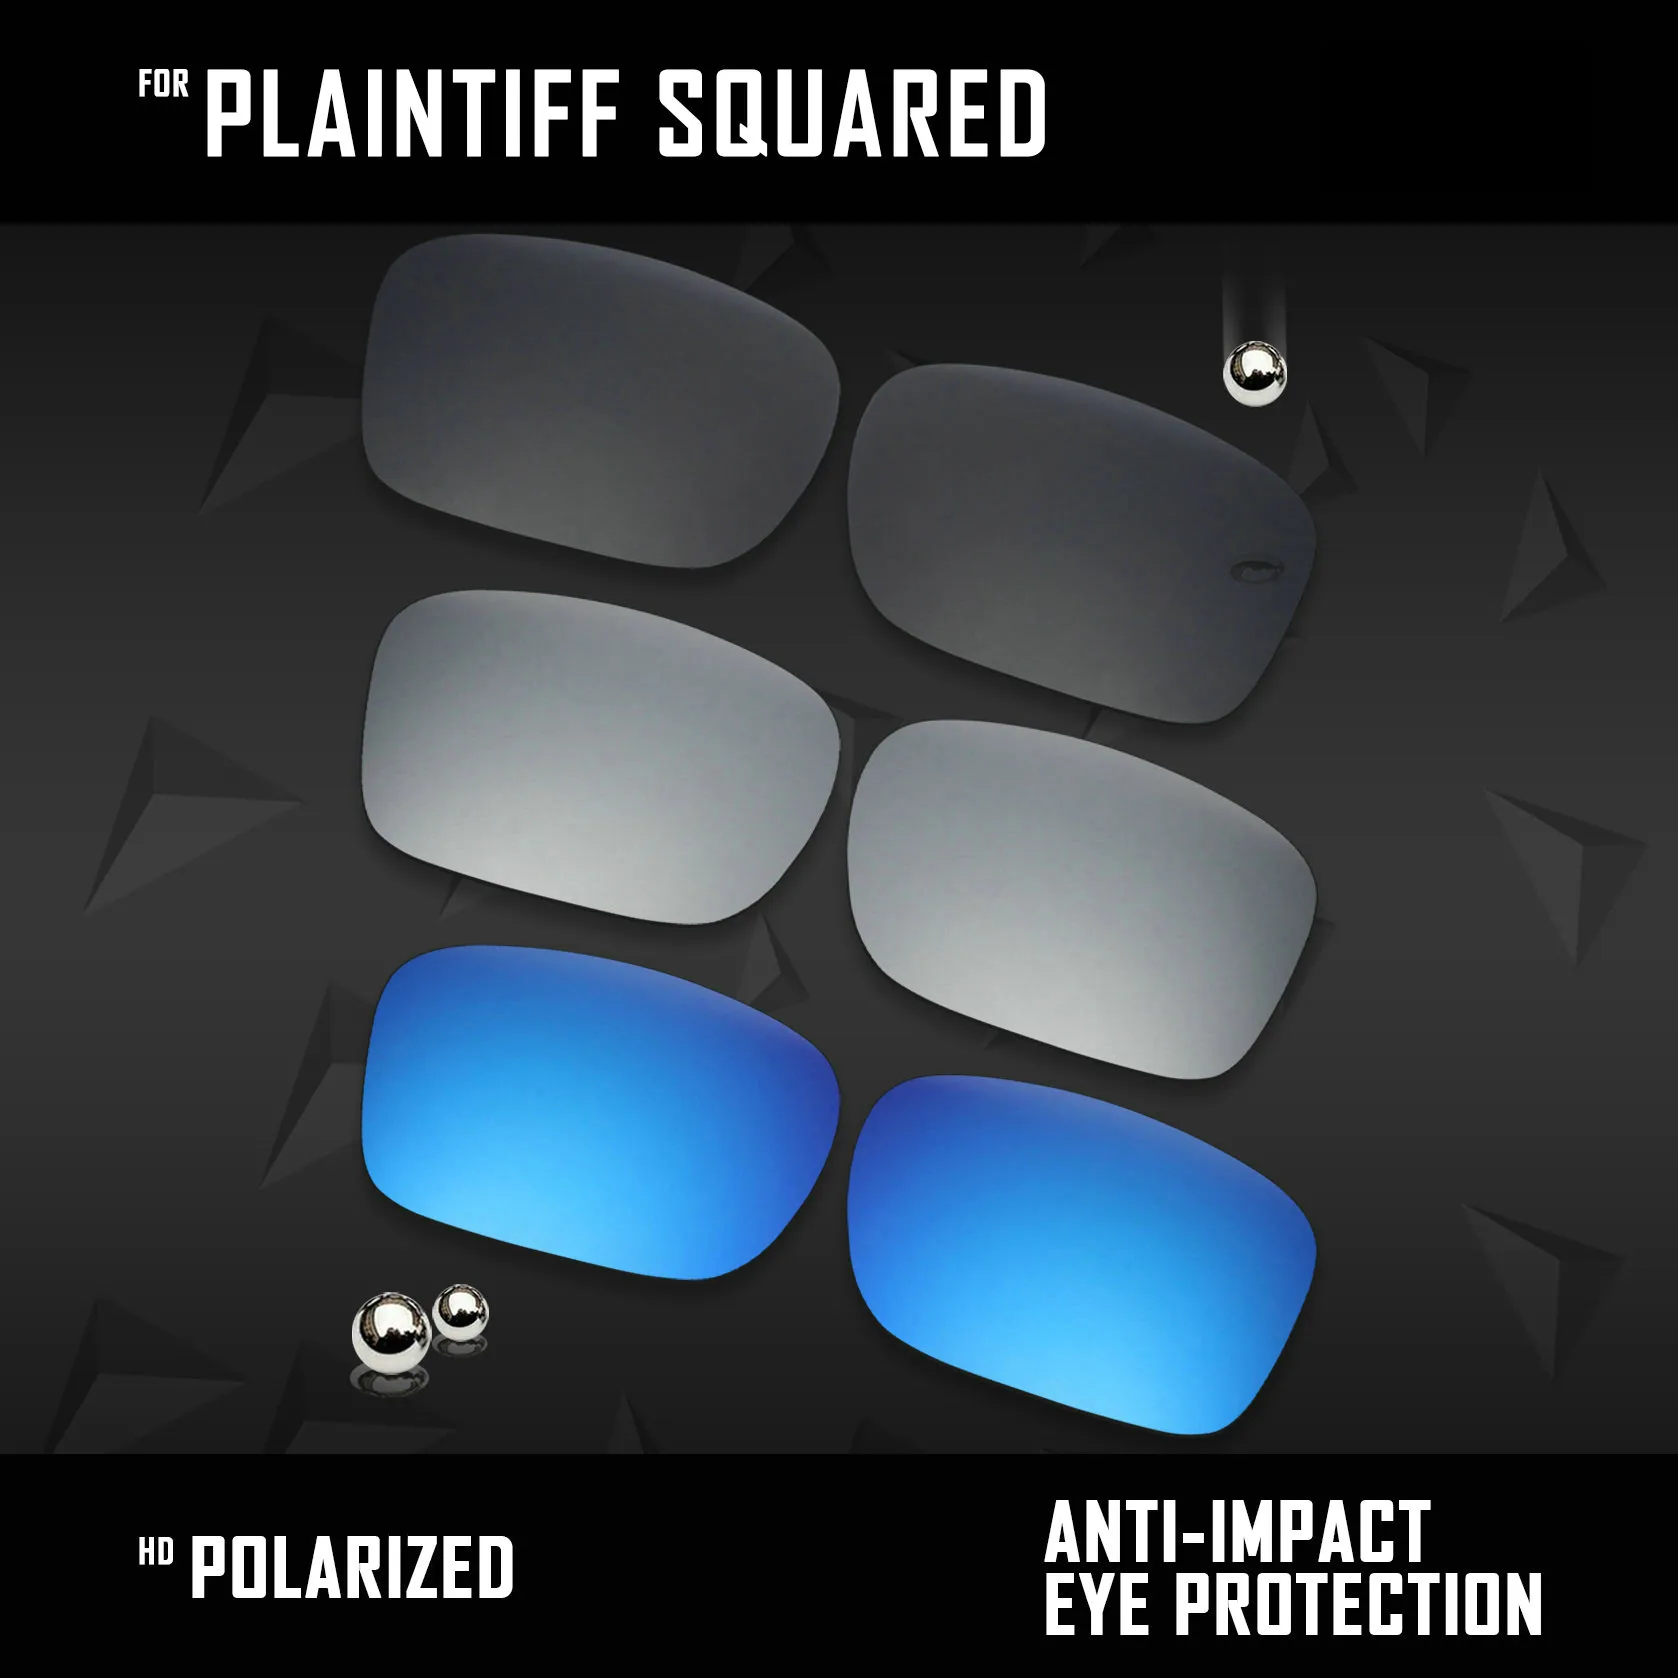 OOWLIT 3 Pairs Polarized Sunglasses Replacement Lenses for Oakley Plaintiff Squared OO4063-Black & Silver & Ice Blue